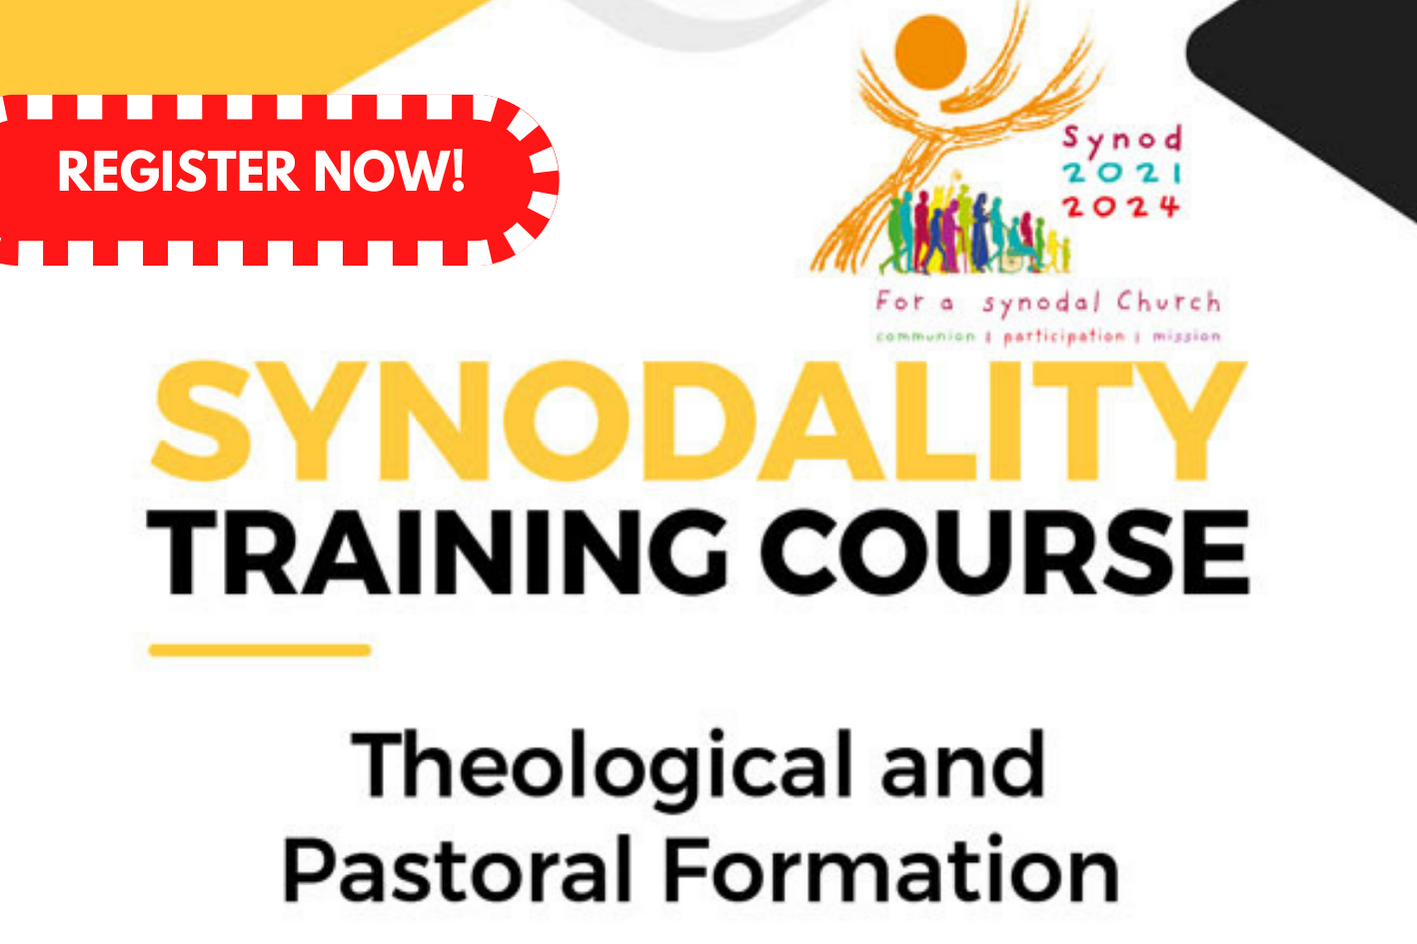 REGISTER NOW! Synodality Training Course - Theological and Pastoral Formation